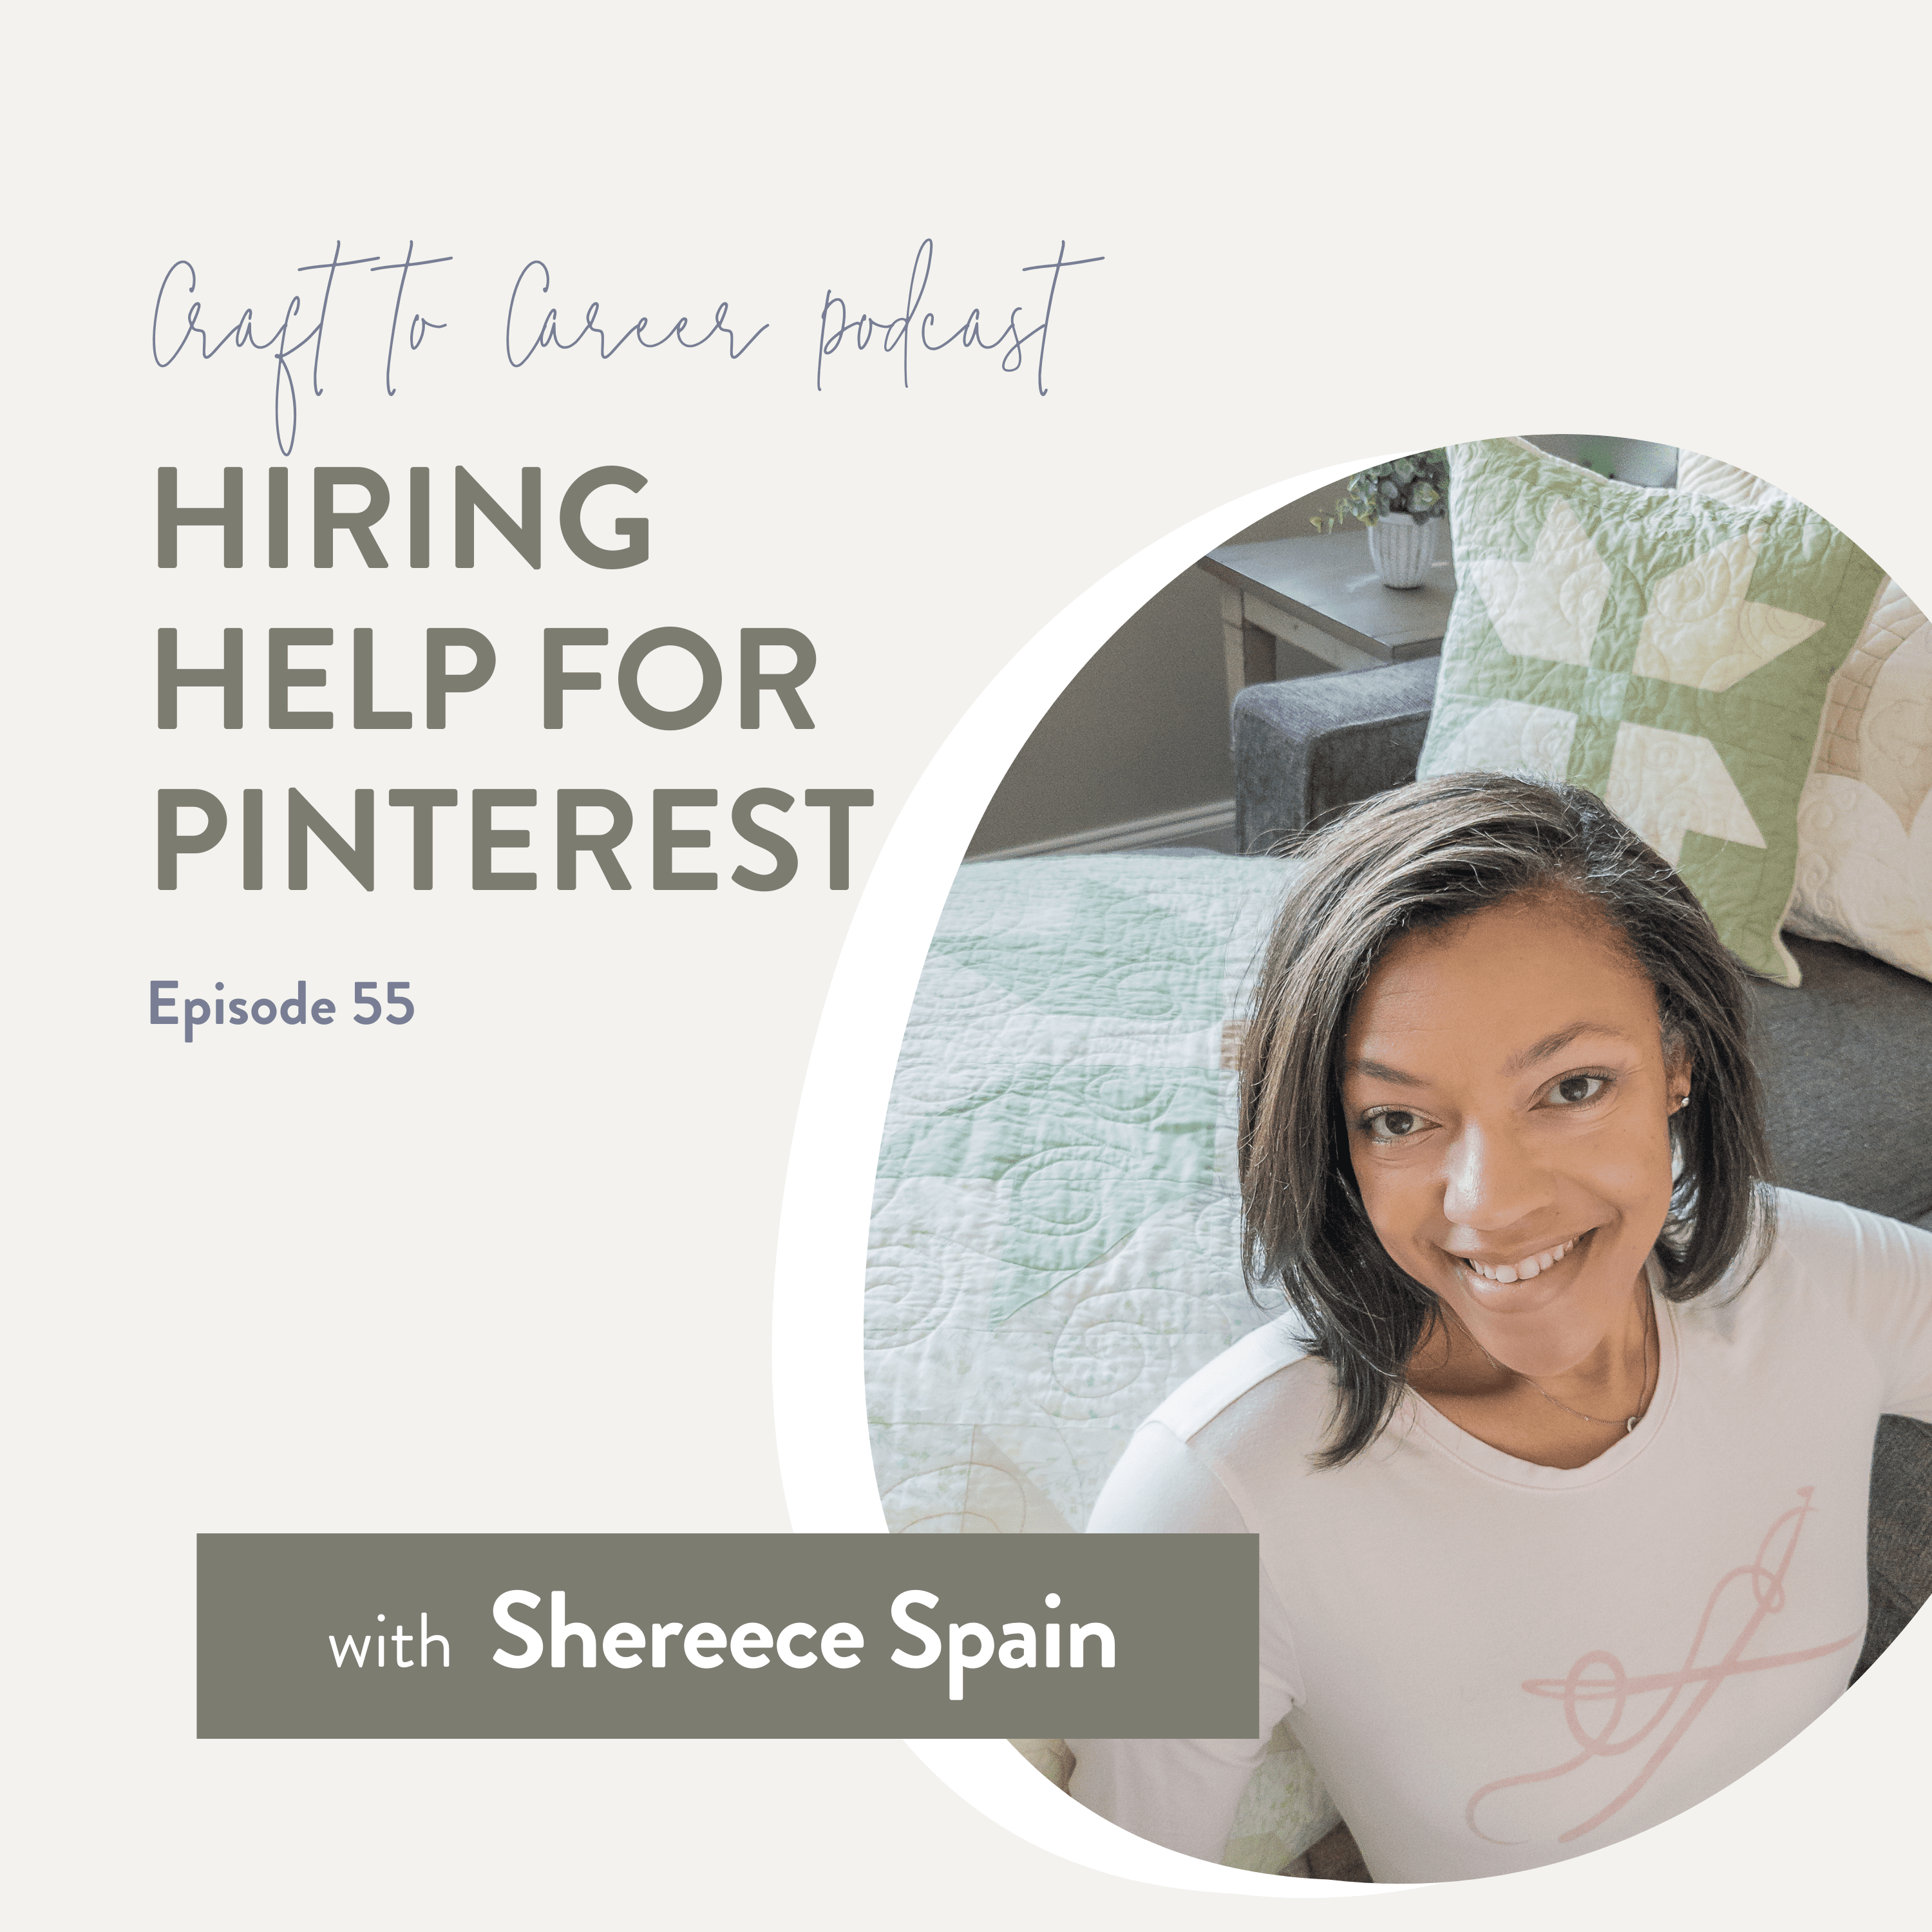 Hiring Help for Pinterest with Shereece Spain